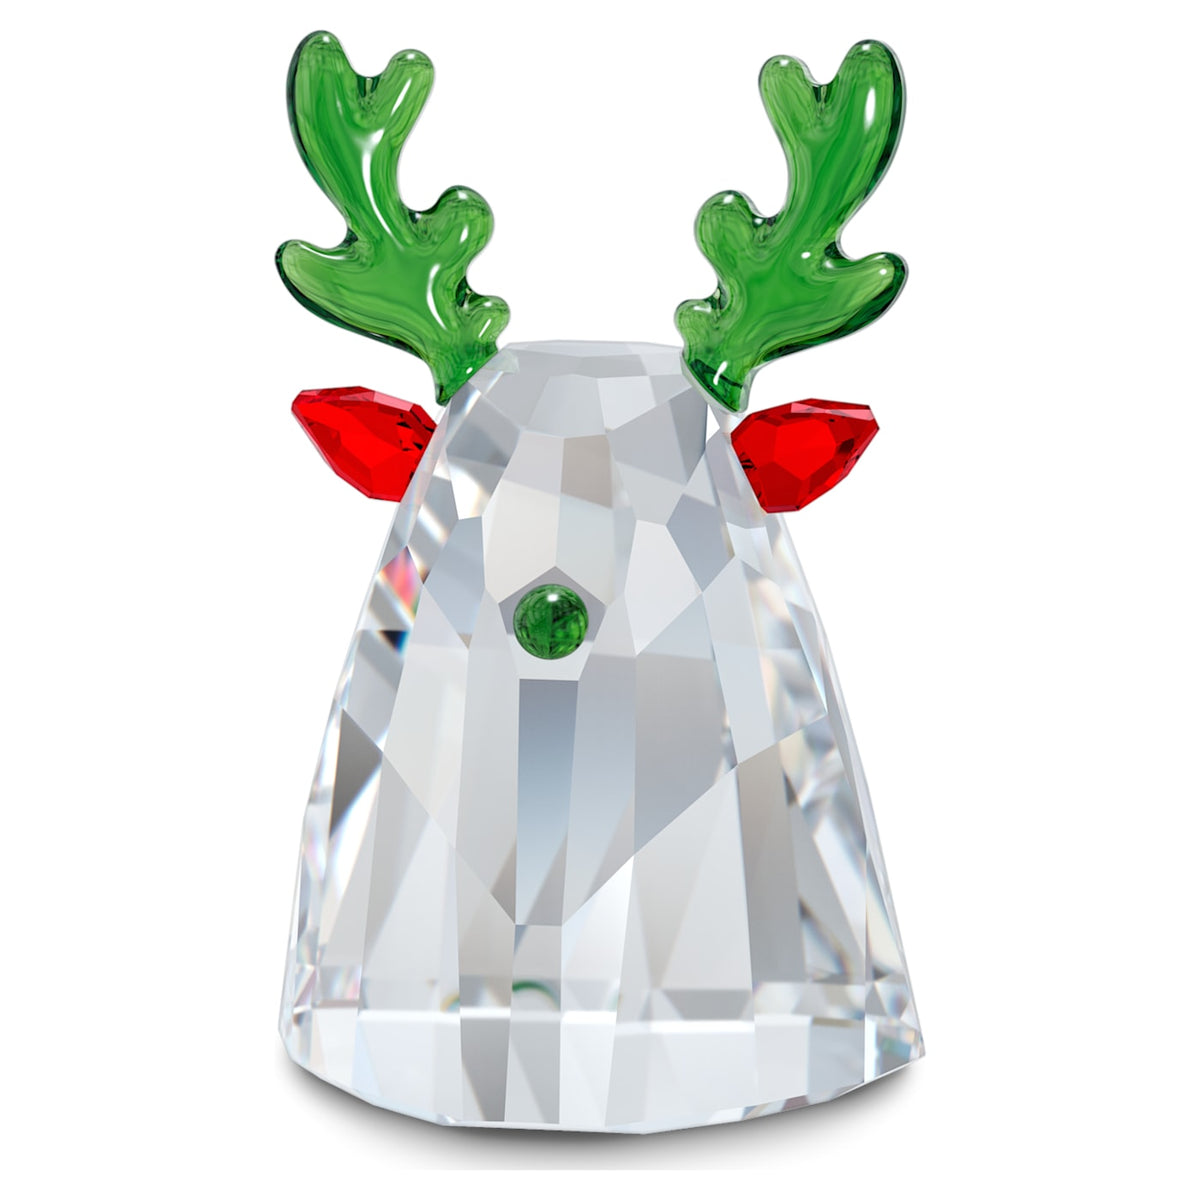 Swarovski Holiday Cheers: Reindeer 5596384 - Limited Edition- Discontinued